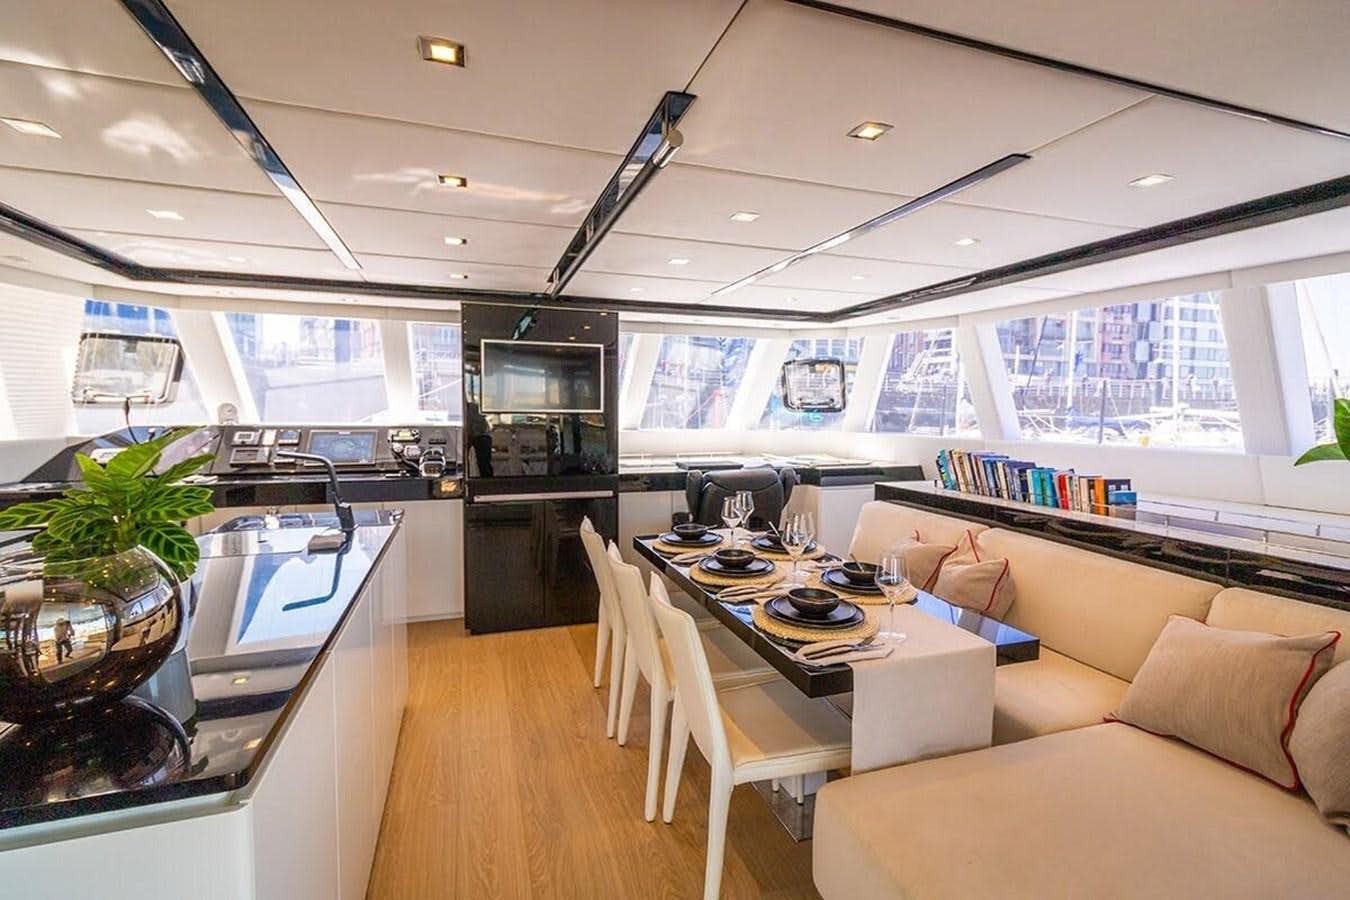 Deo juvante
Yacht for Sale